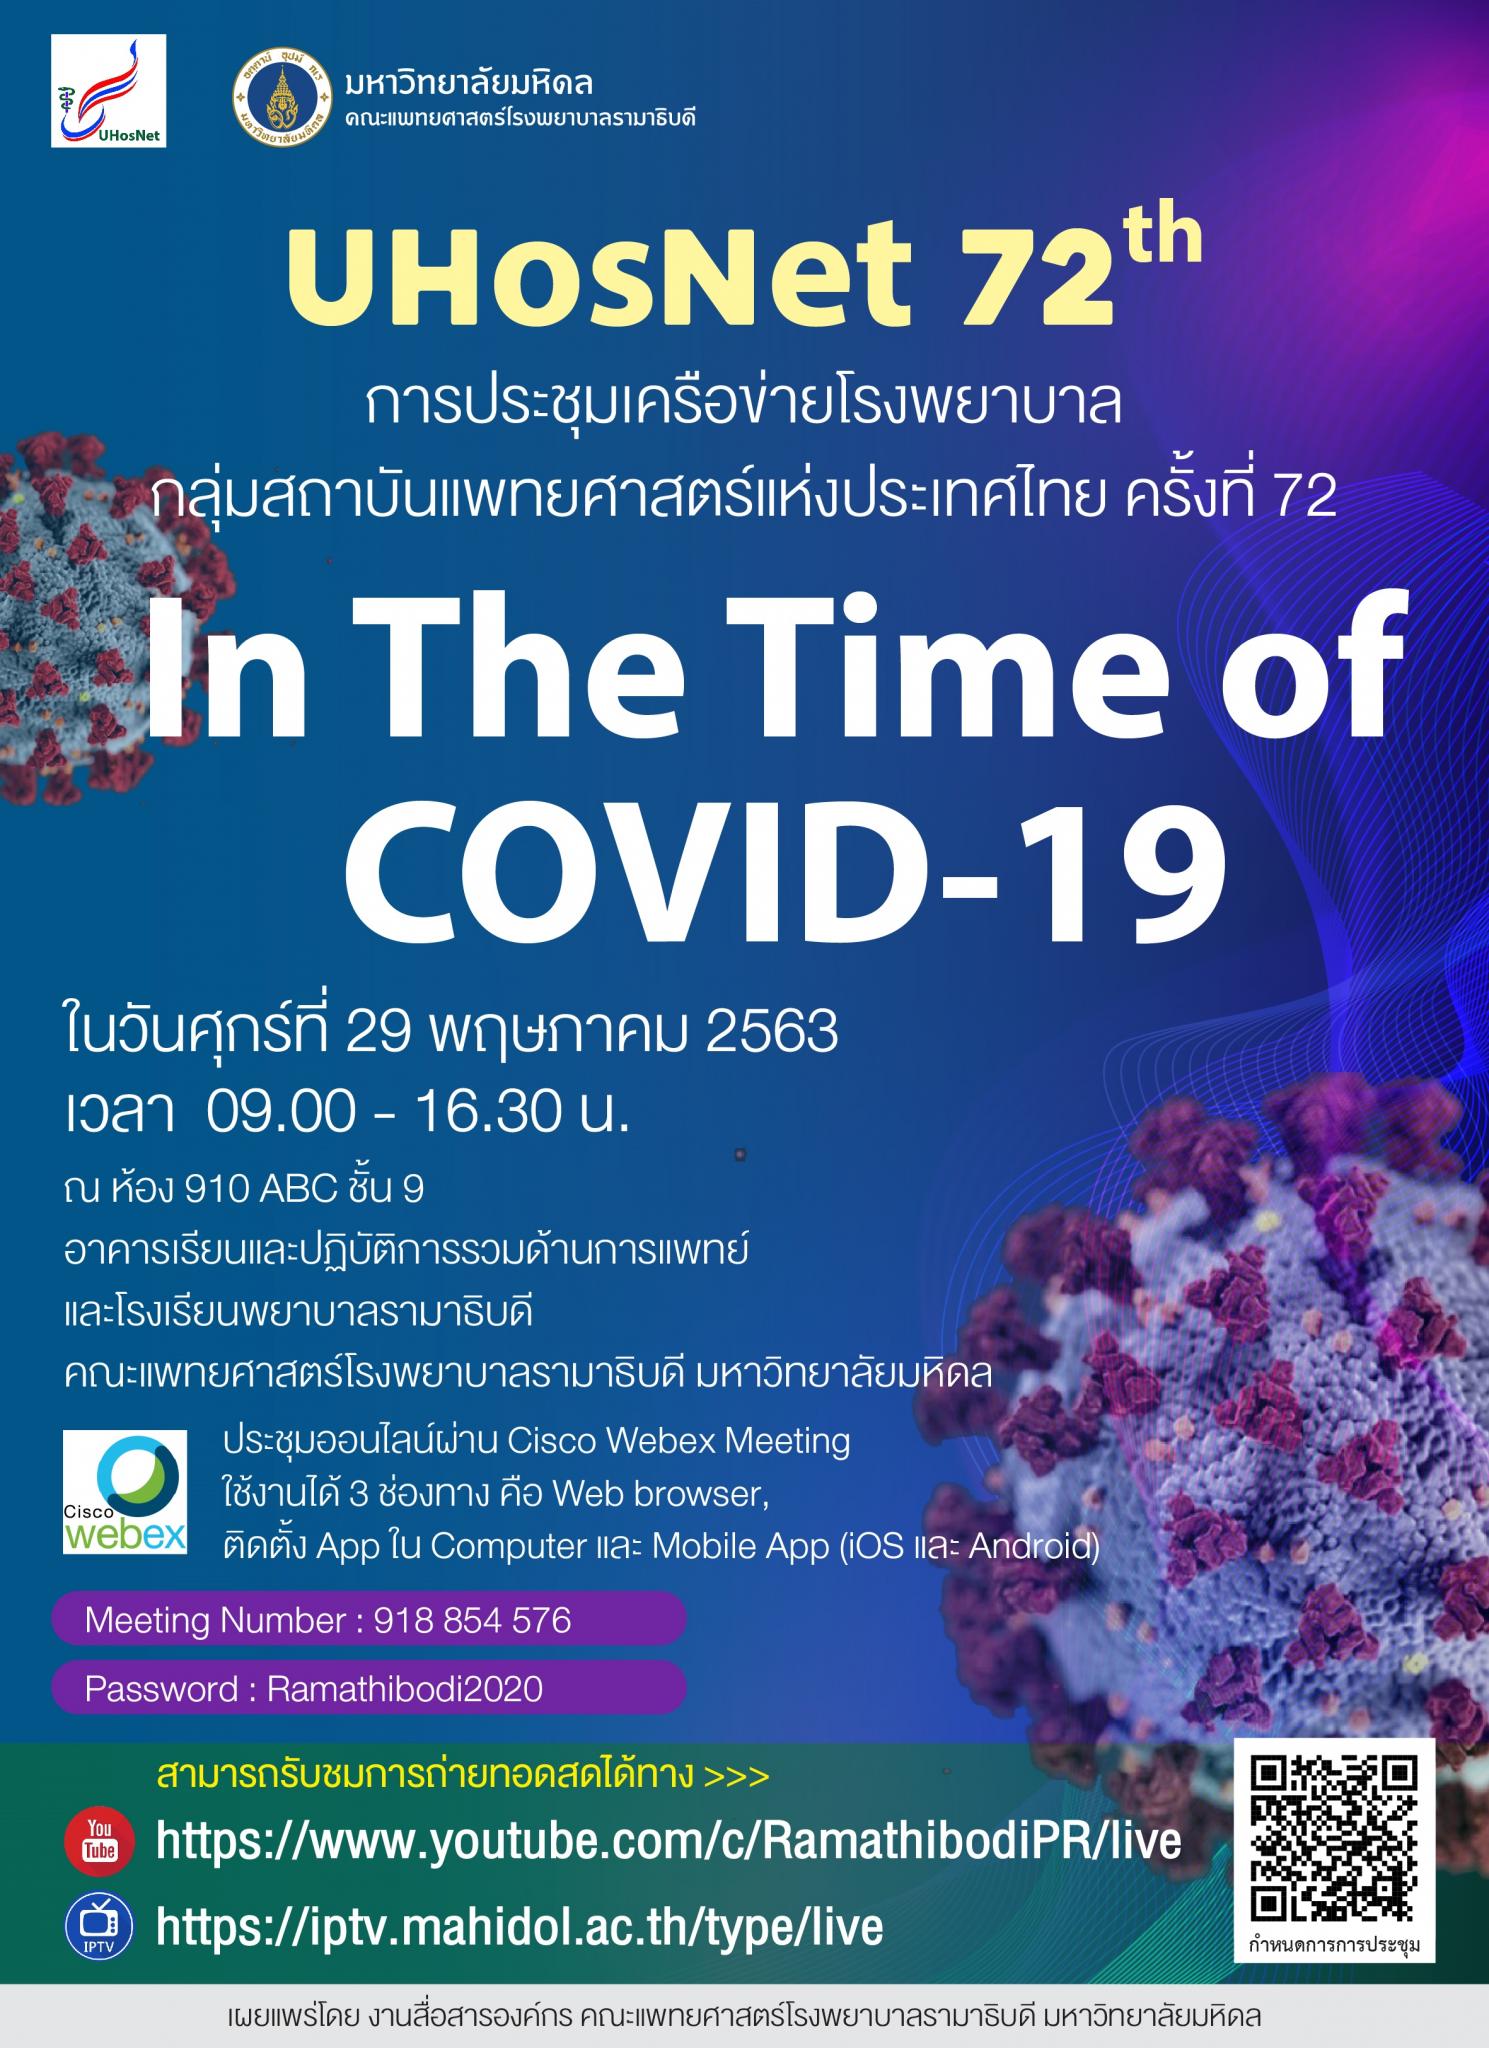 UHosNet 72th "In the Time of COVID-19"